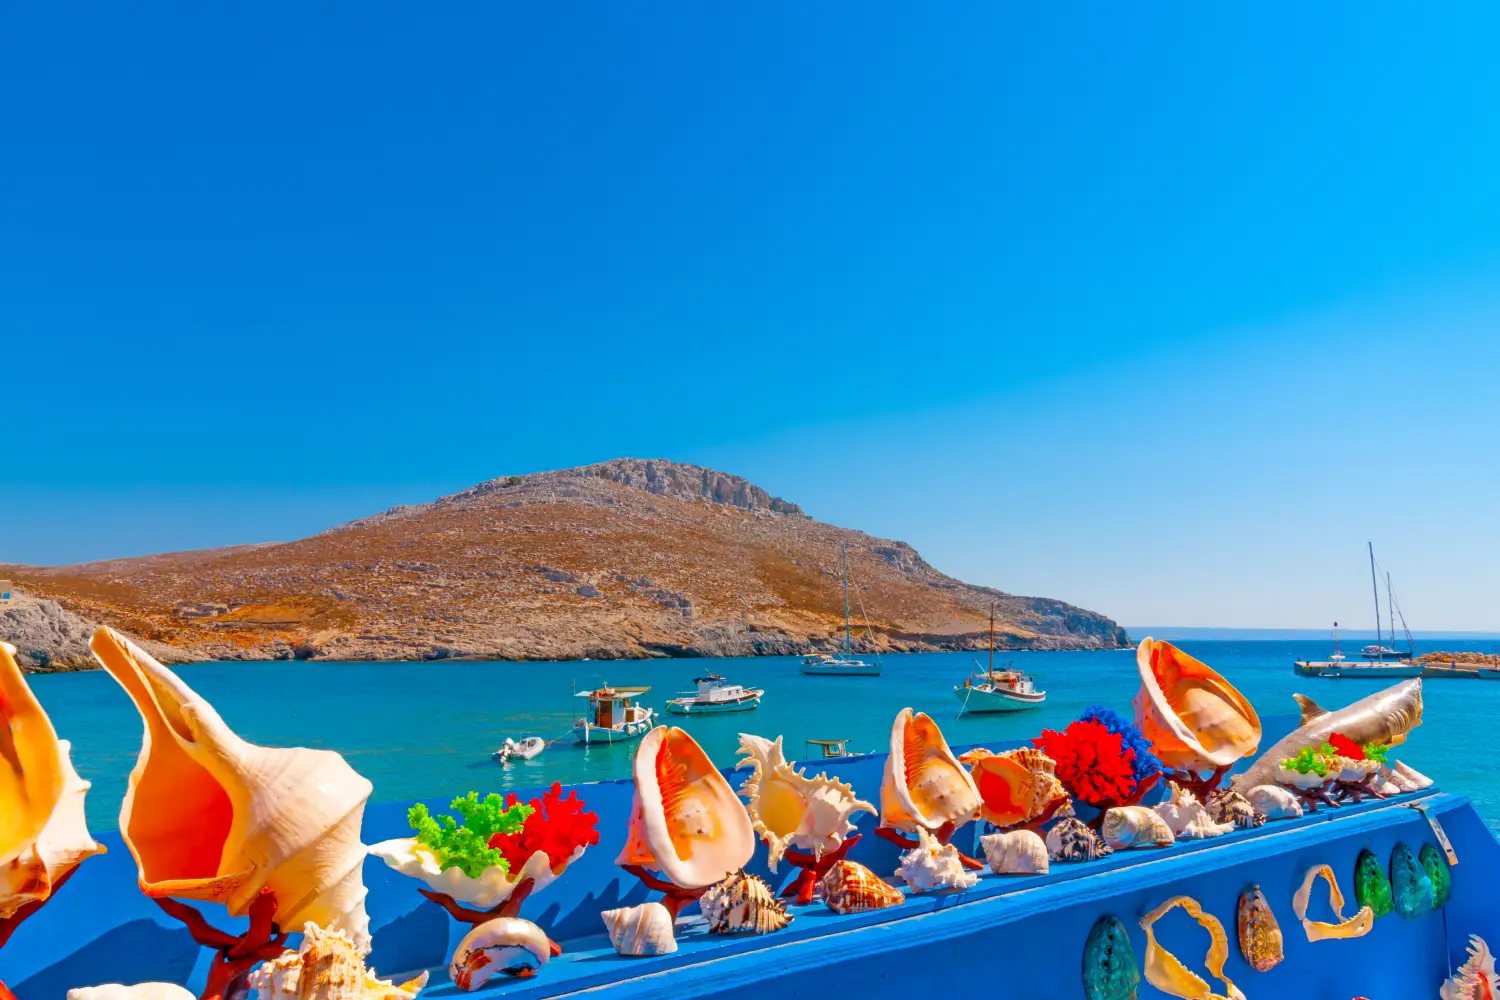 Ferry to Pserimos - Shells exposed at the local market of Pserimos island in Greece.